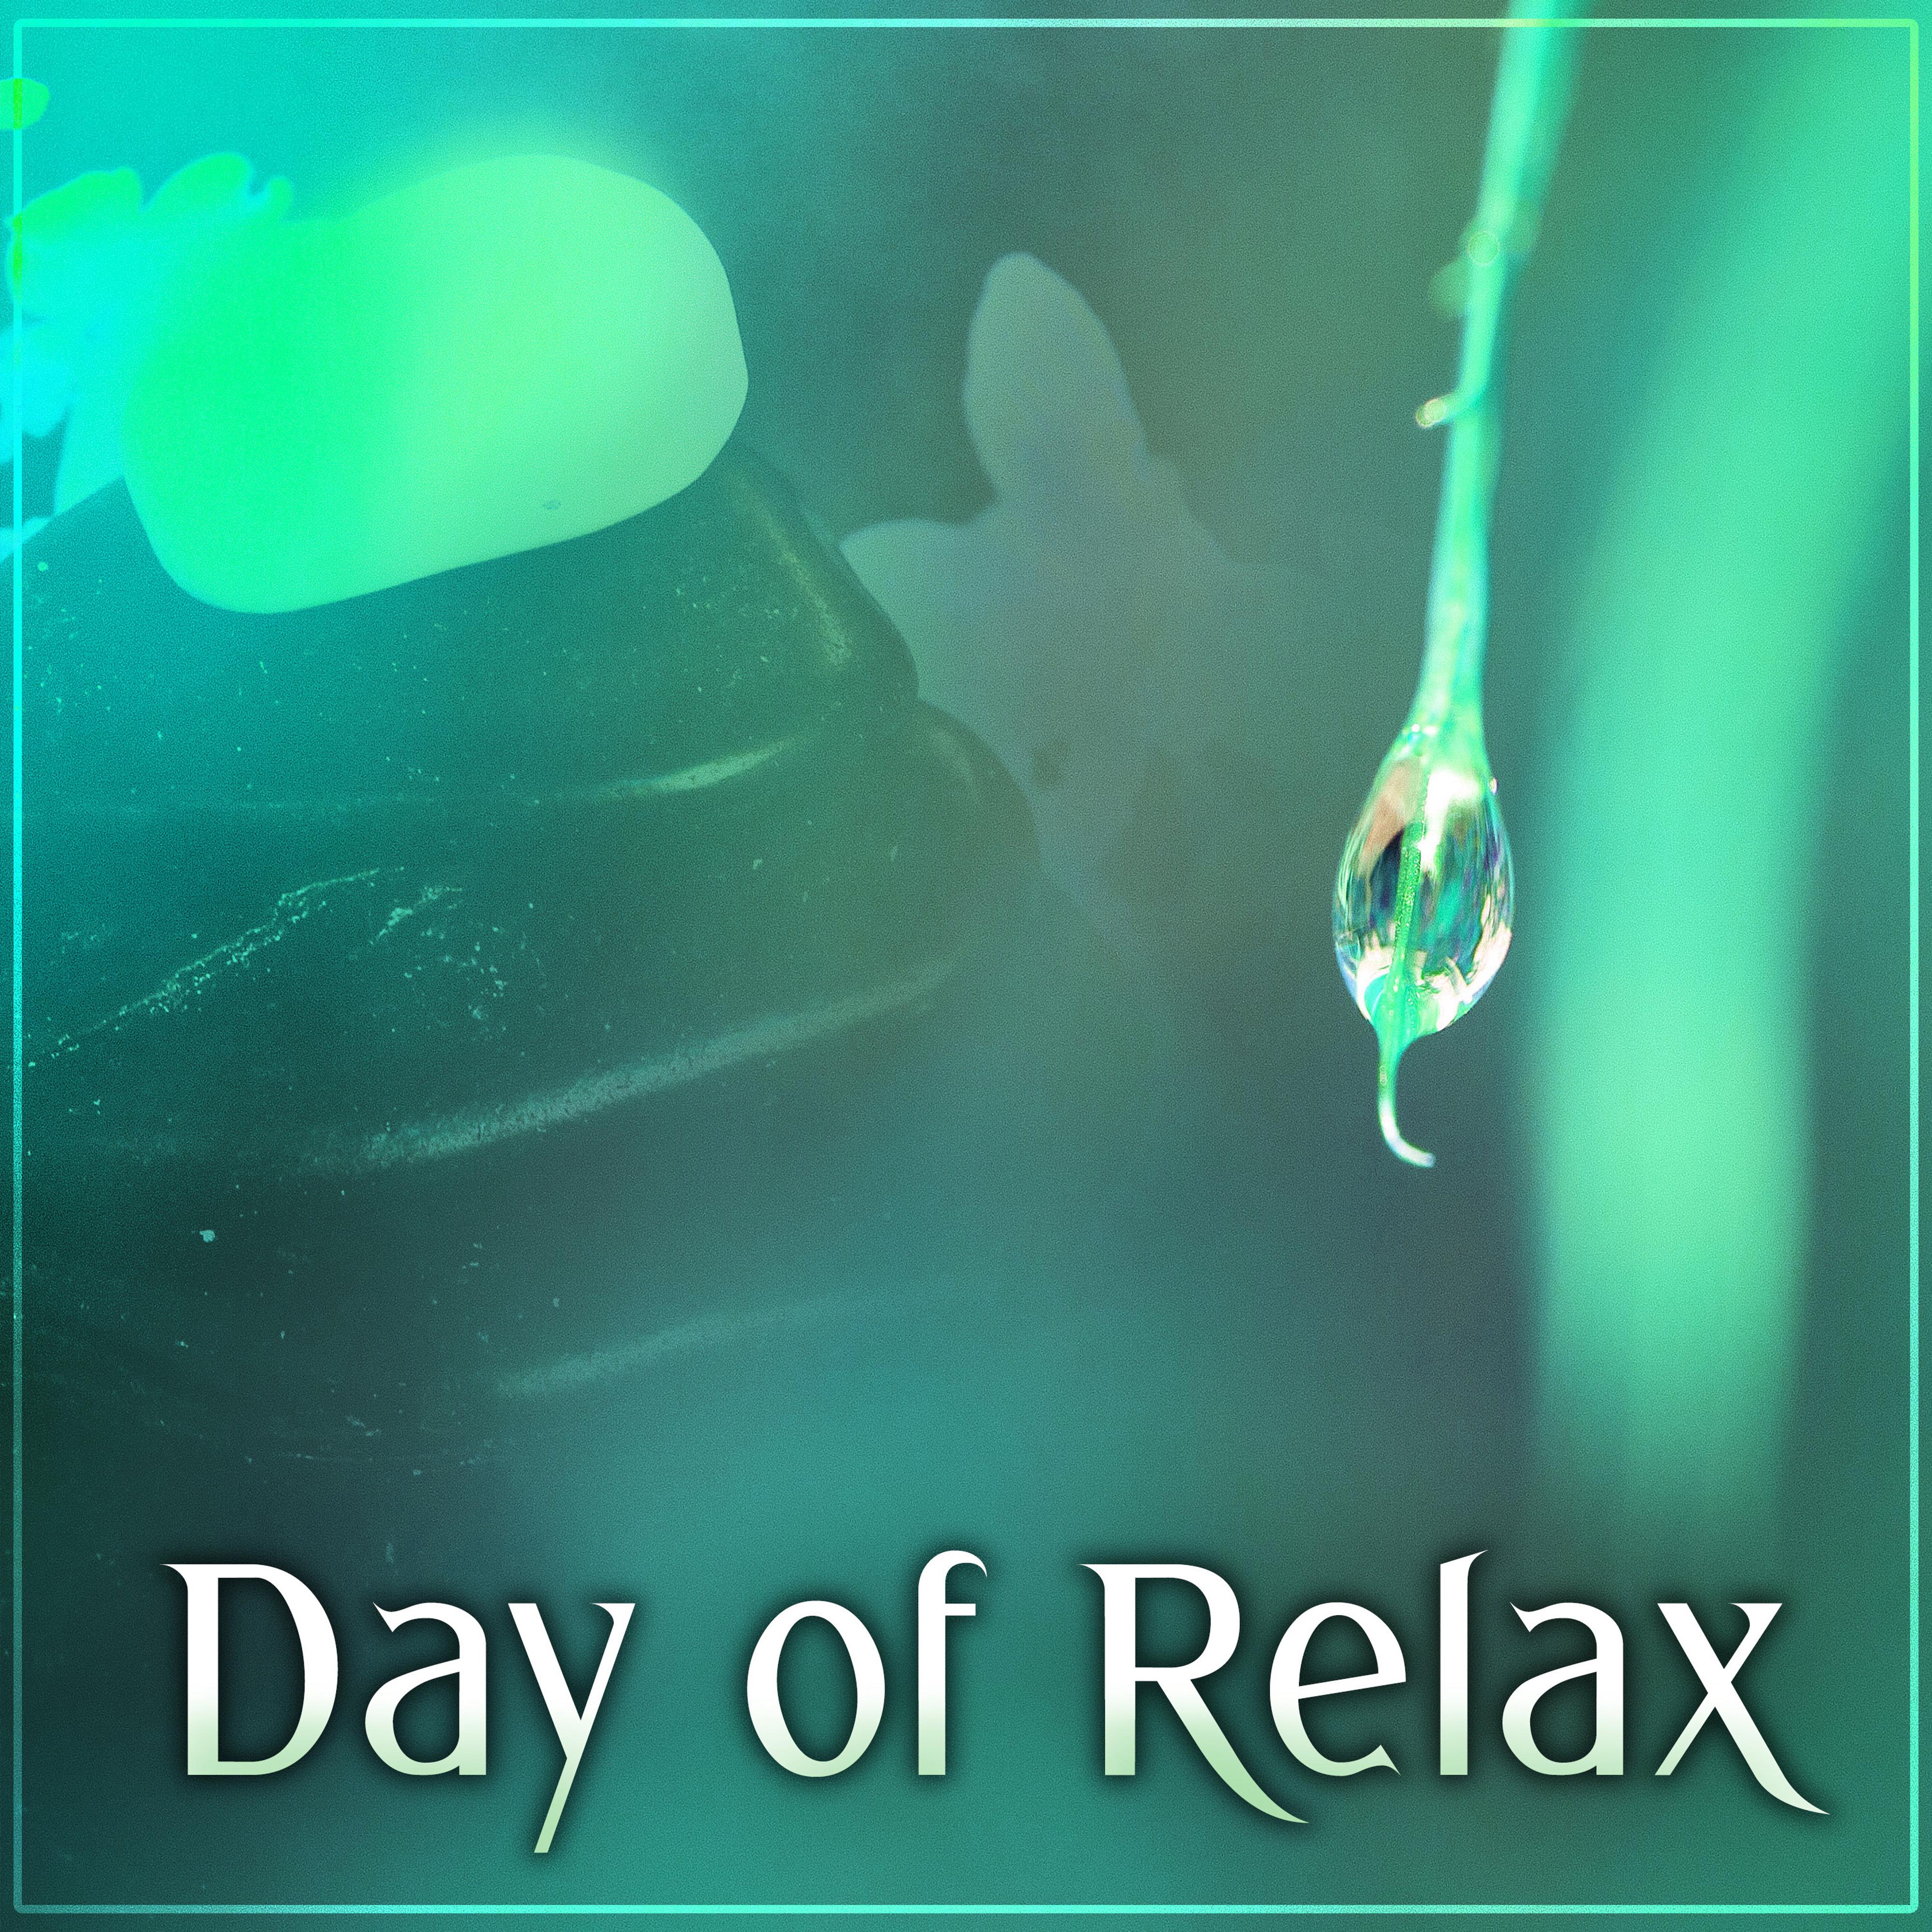 Day of Relax – Peaceful Music for Pure Relax, Spa, Wellness, Healing Smooth Sounds for Therapy, Massage, Hotel Spa & Wellness